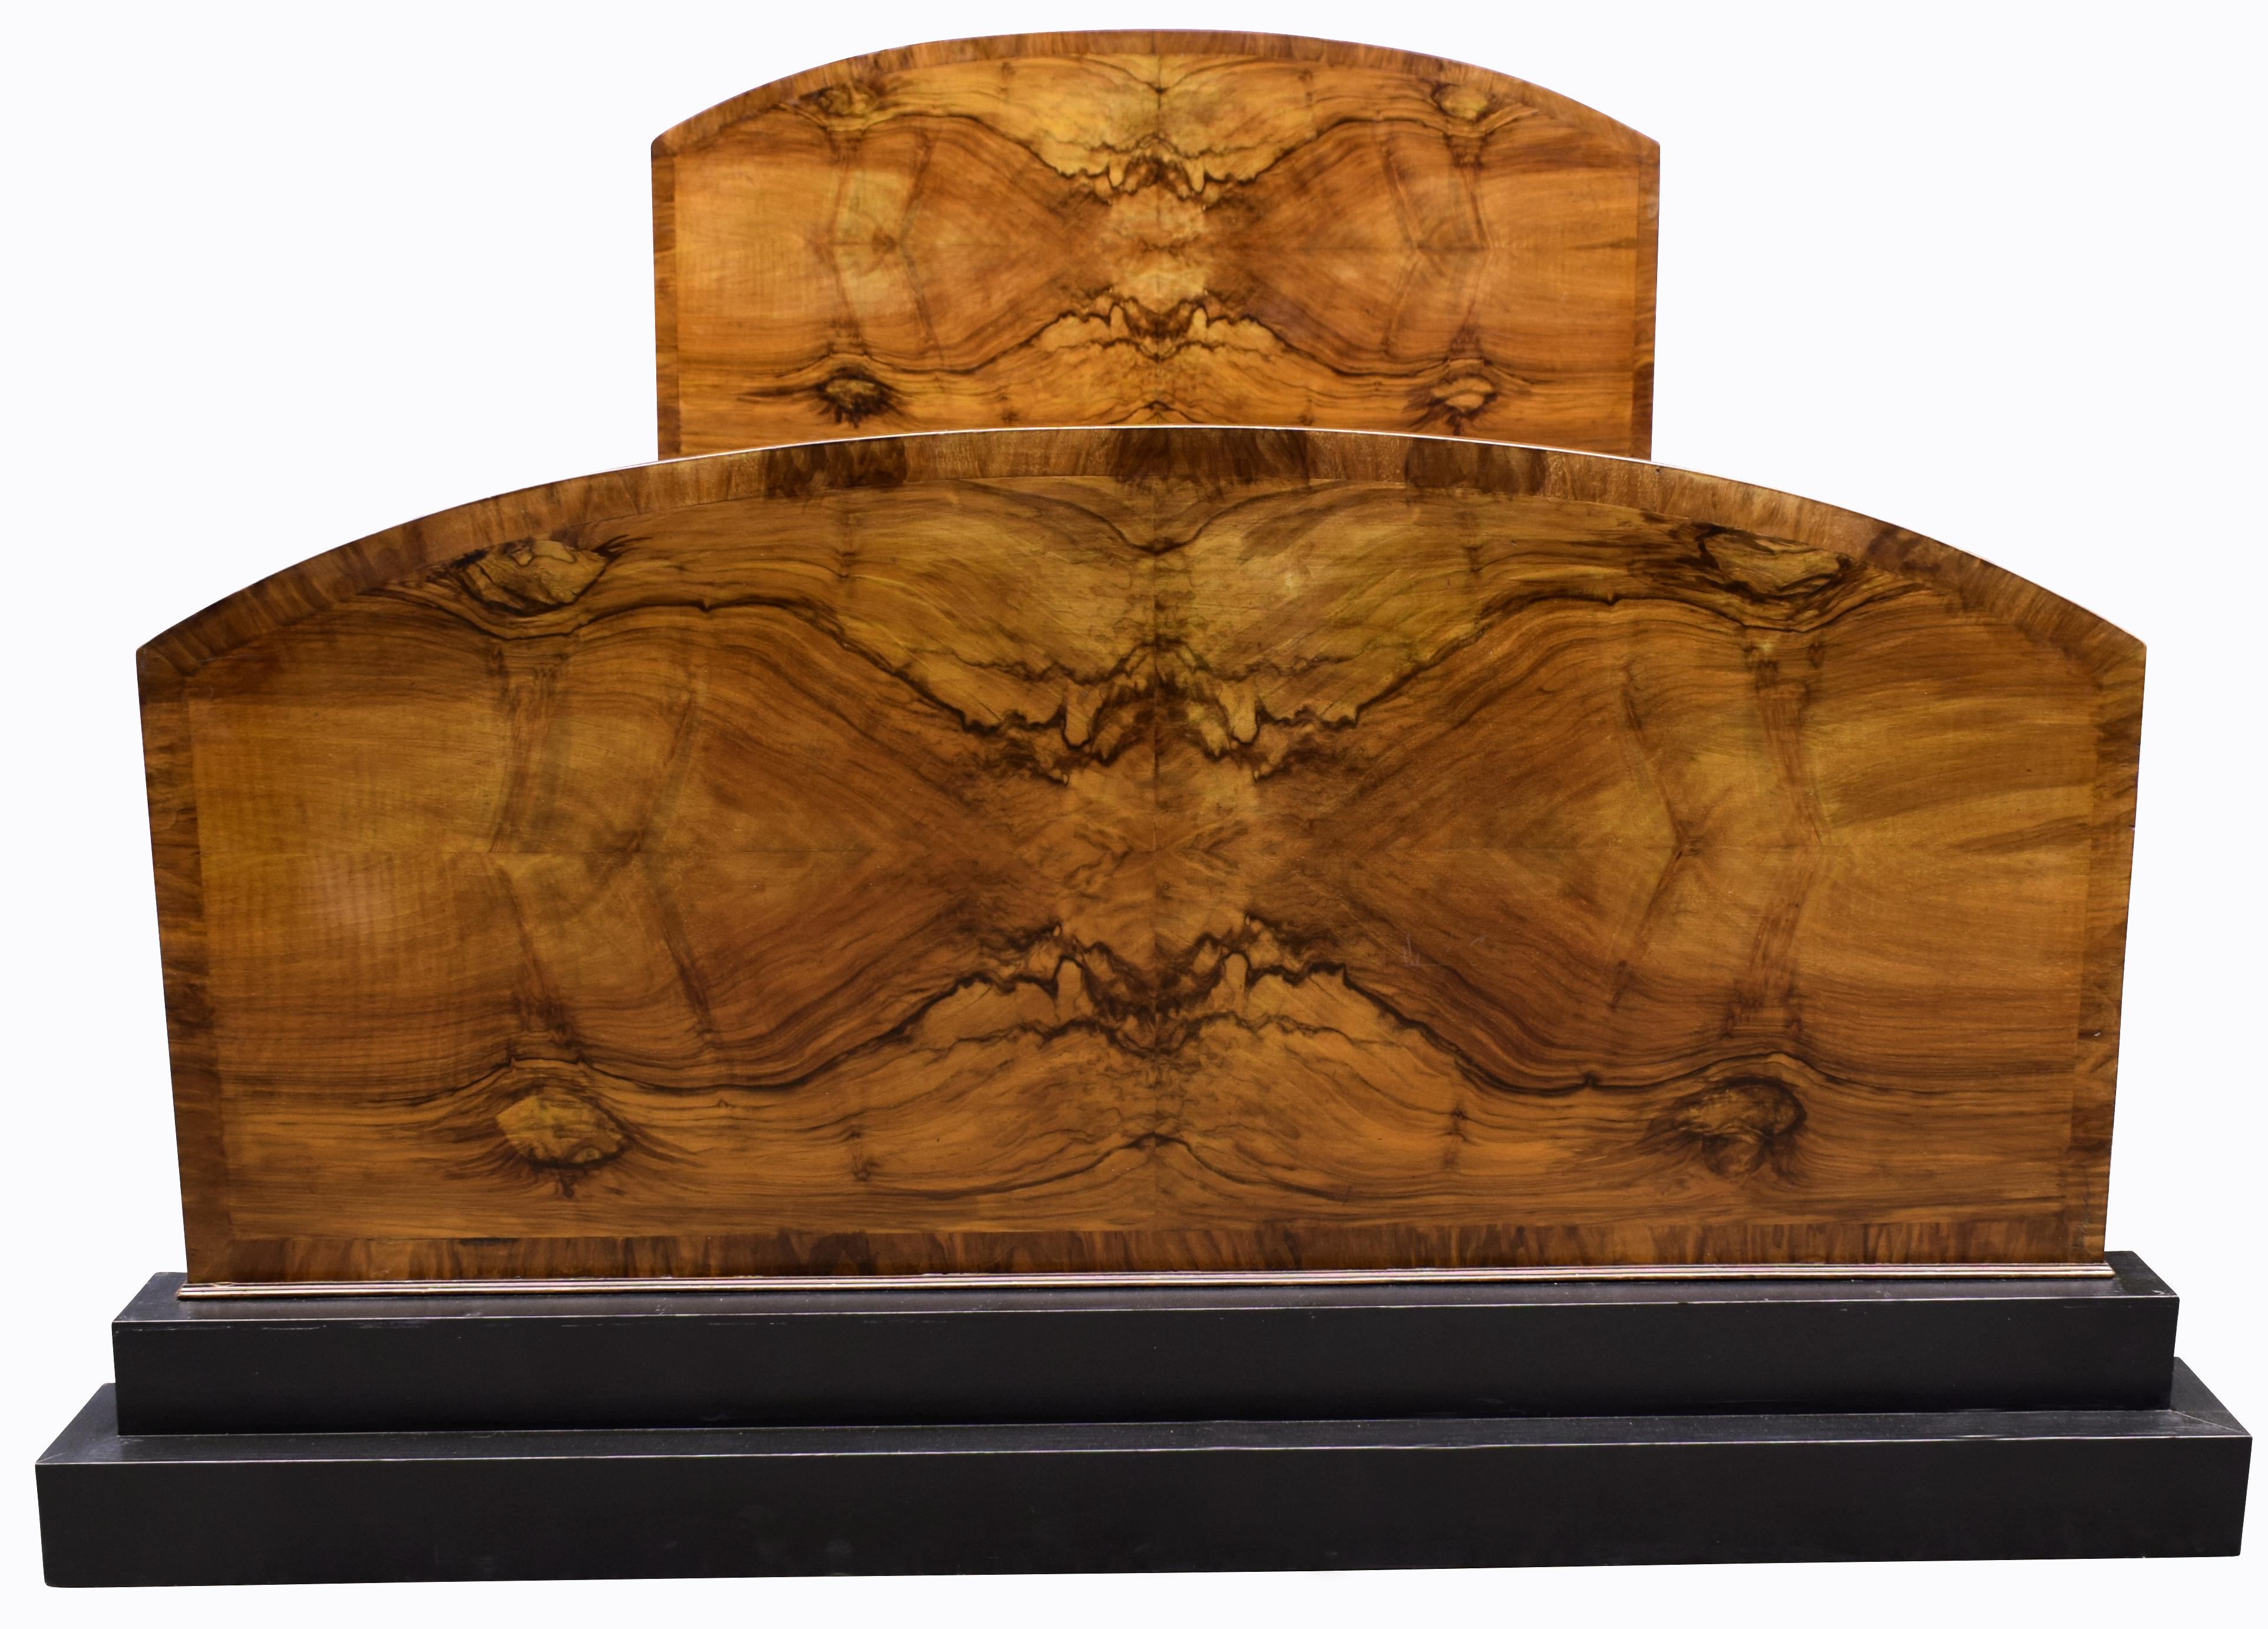 This is a wonderful opportunity to treat your bedroom to this statement piece Art Deco double bed. These style of beds that scream the Art Deco style are very few and far between and anyone who loves this era or collects from it will know this too.